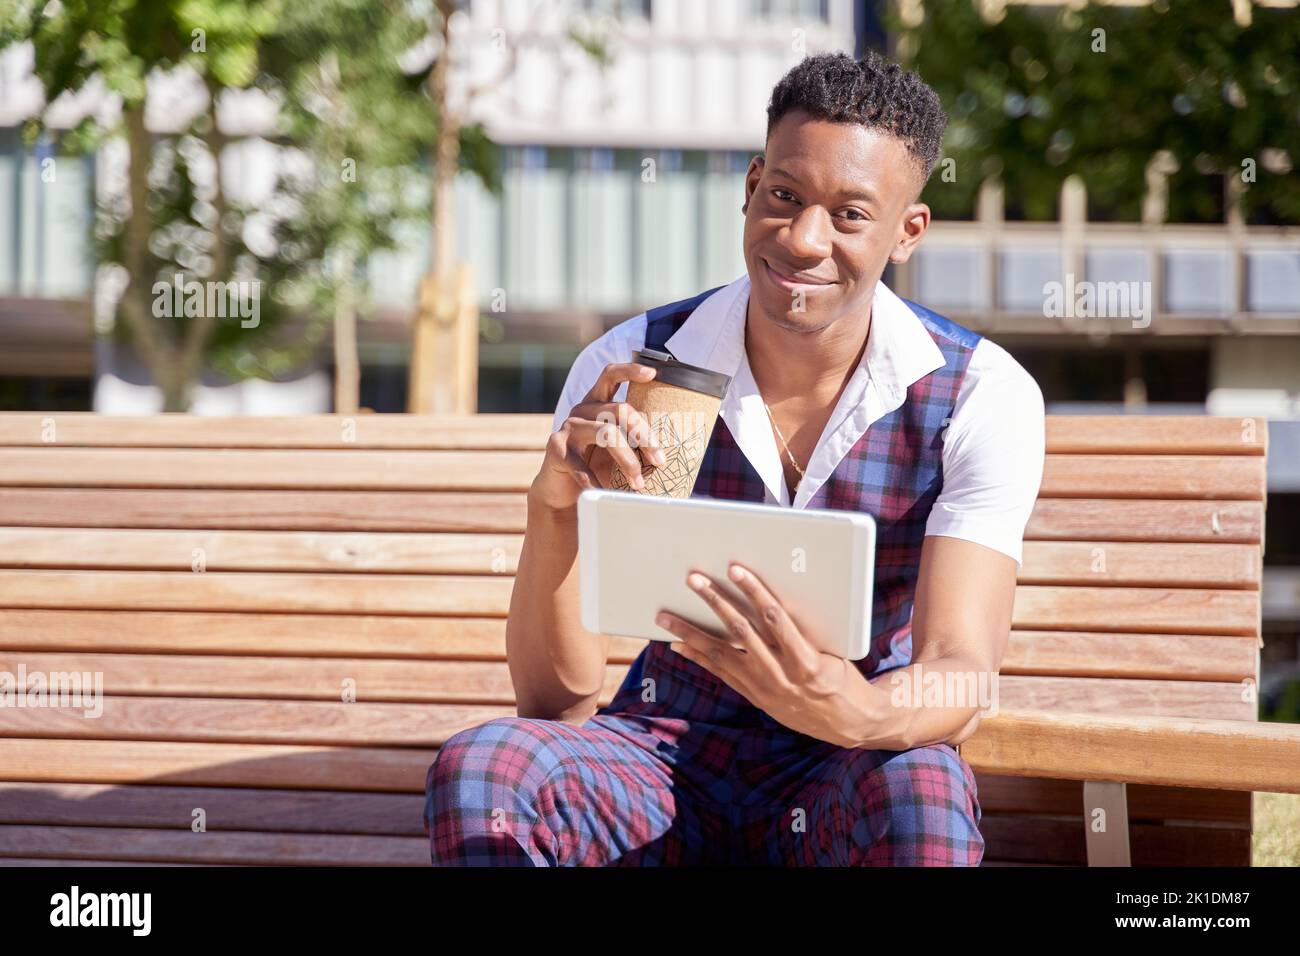 african american young man with tablet computer and take away coffee Stock Photo